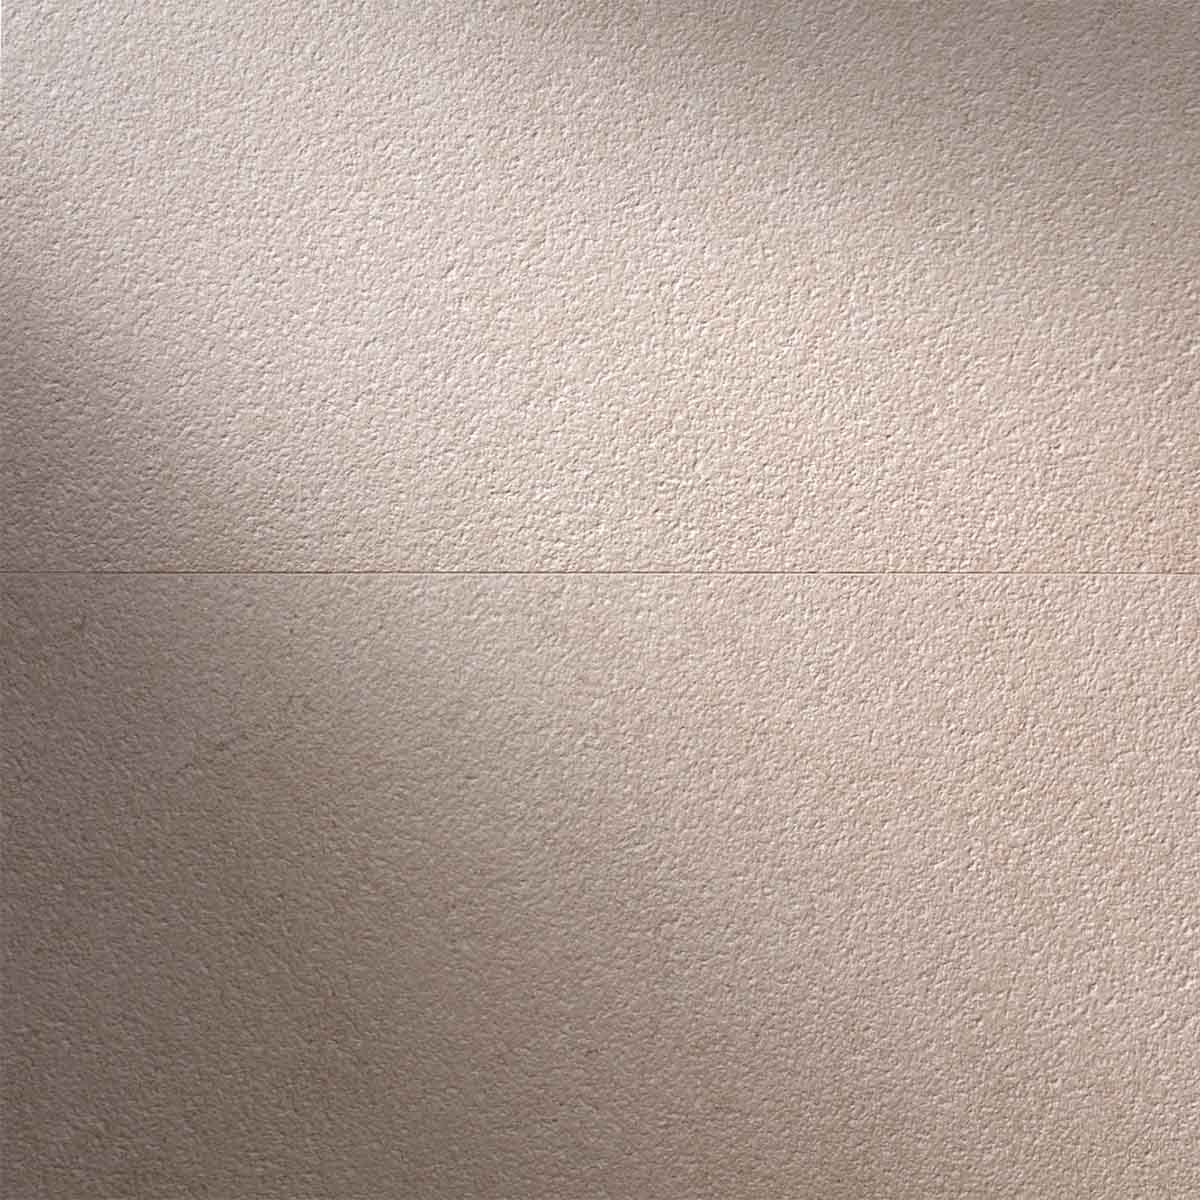 cluny sand stone effect textured ceramic wall tile 33x100cm lifestyle